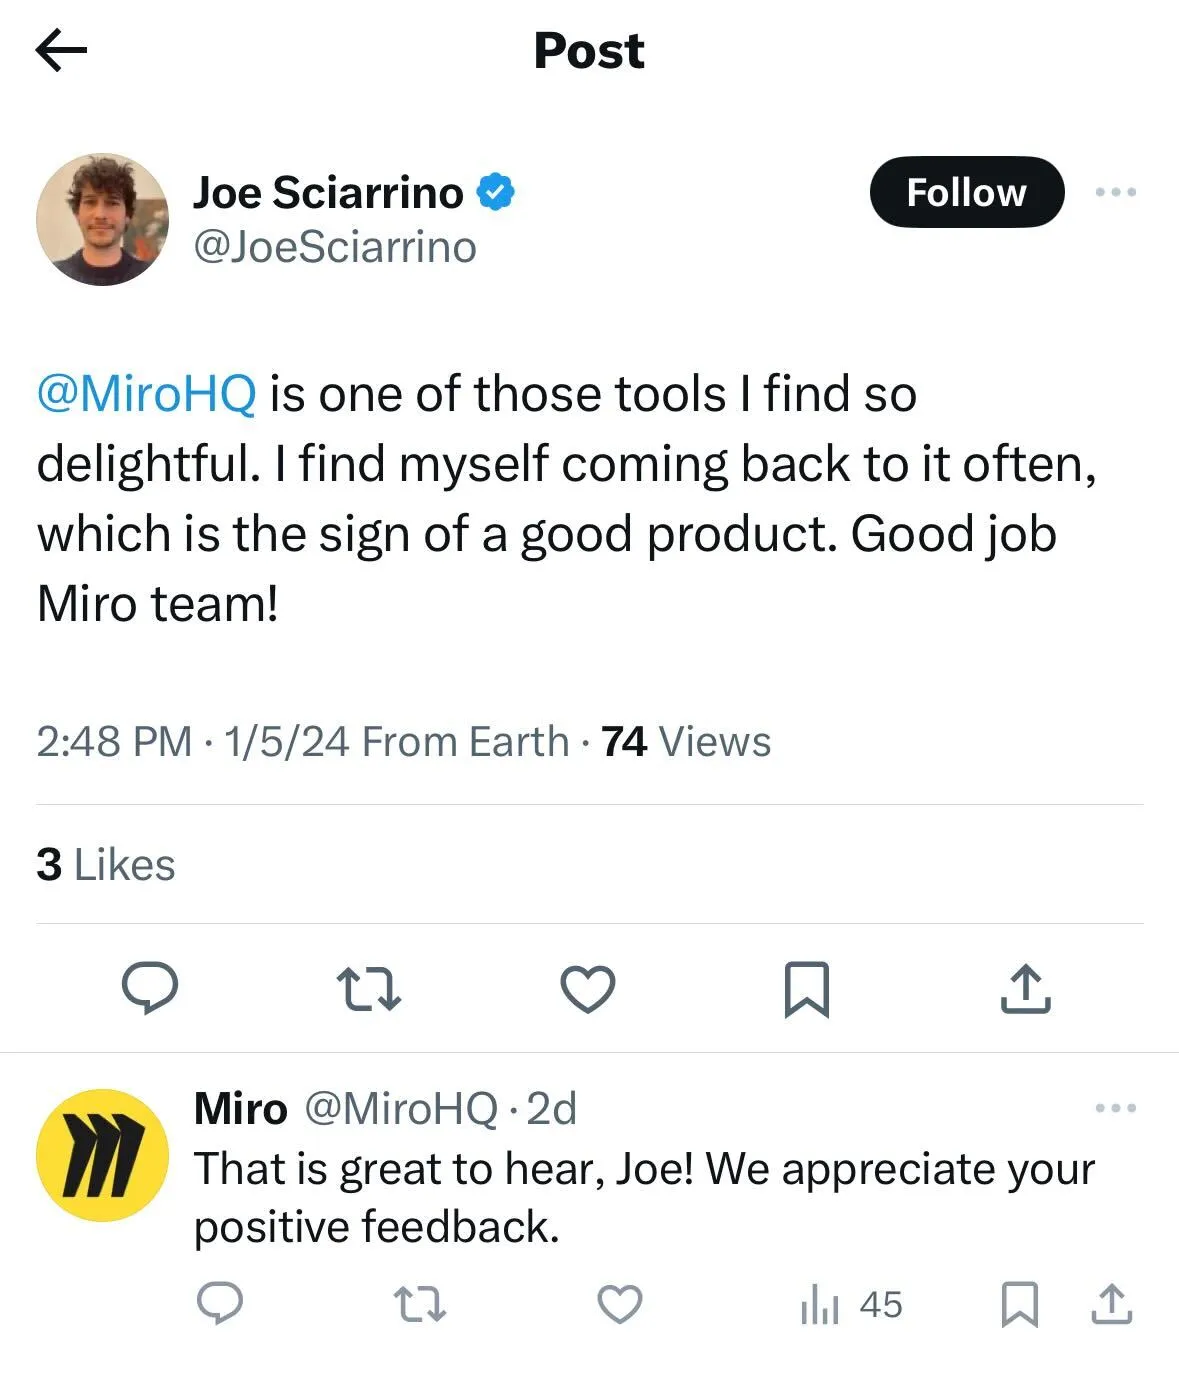 A post on X, formerly known as Twitter. The user praises Miro's team and their product. Miro brand account responds thanking the user for positive feedback.